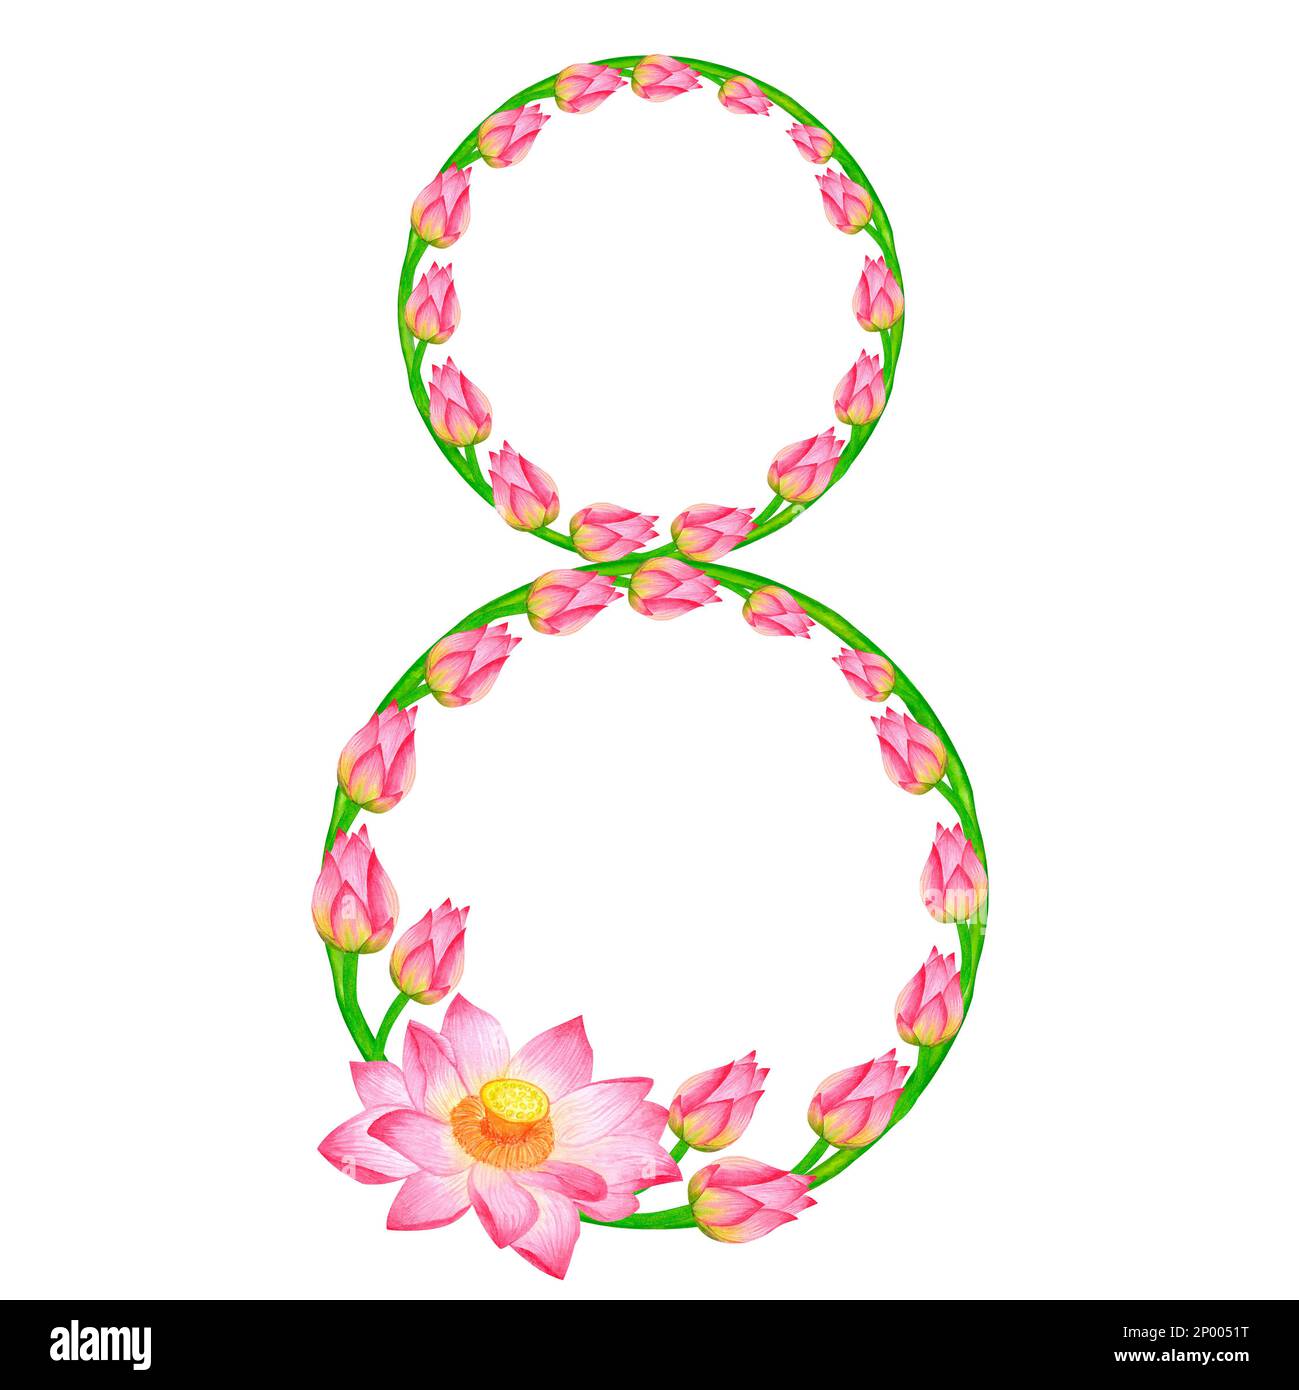 Wreath in the form of number eight from pink of buds lotus flower. Women's Day. Hand-drawn watercolor illustration isolated on white background. For p Stock Photo